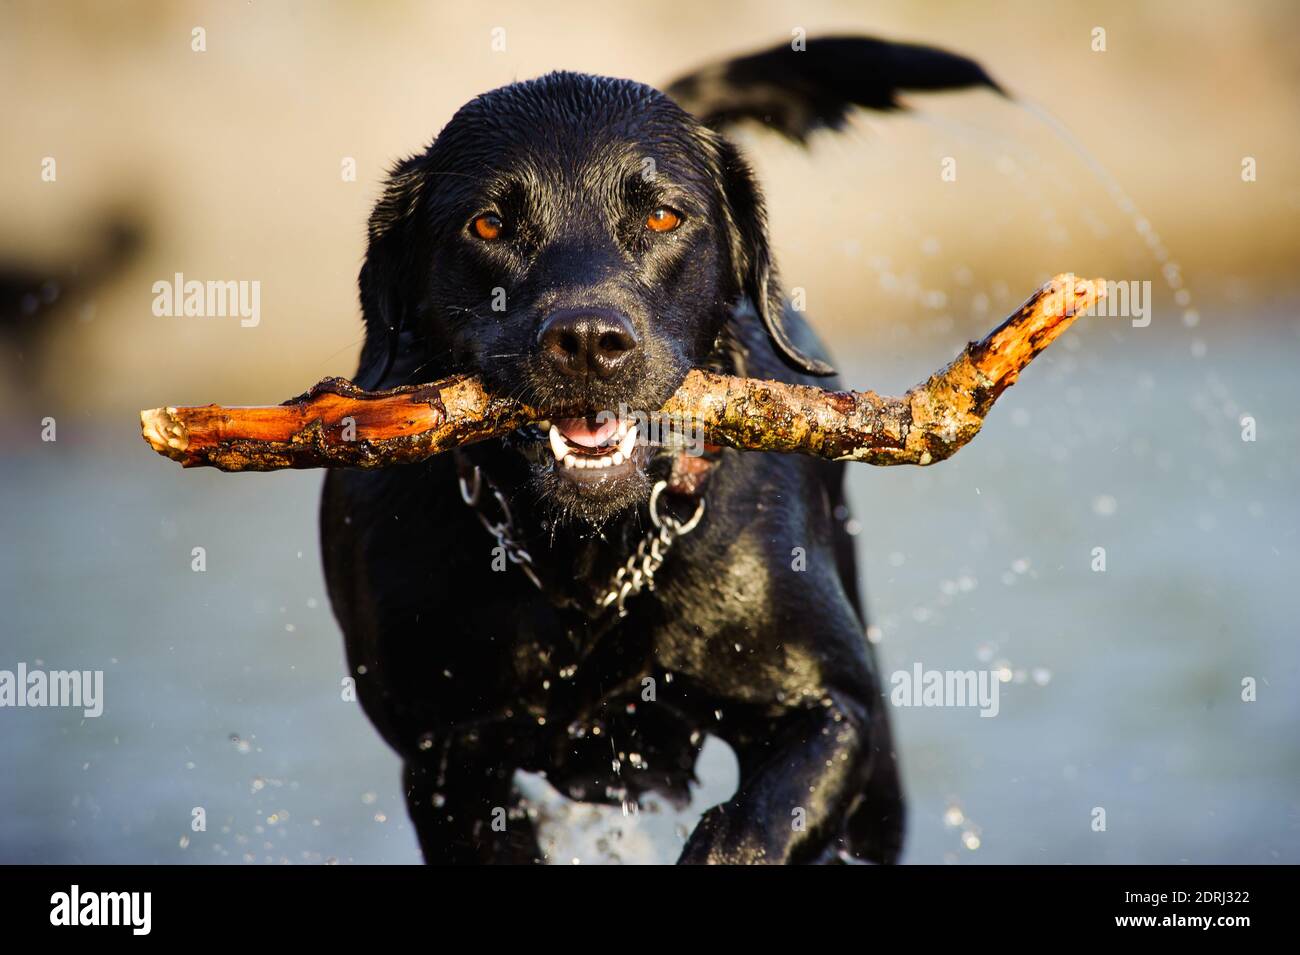 Close-up Portrait Of Dog Carrying Stick In Mouth Stock Photo